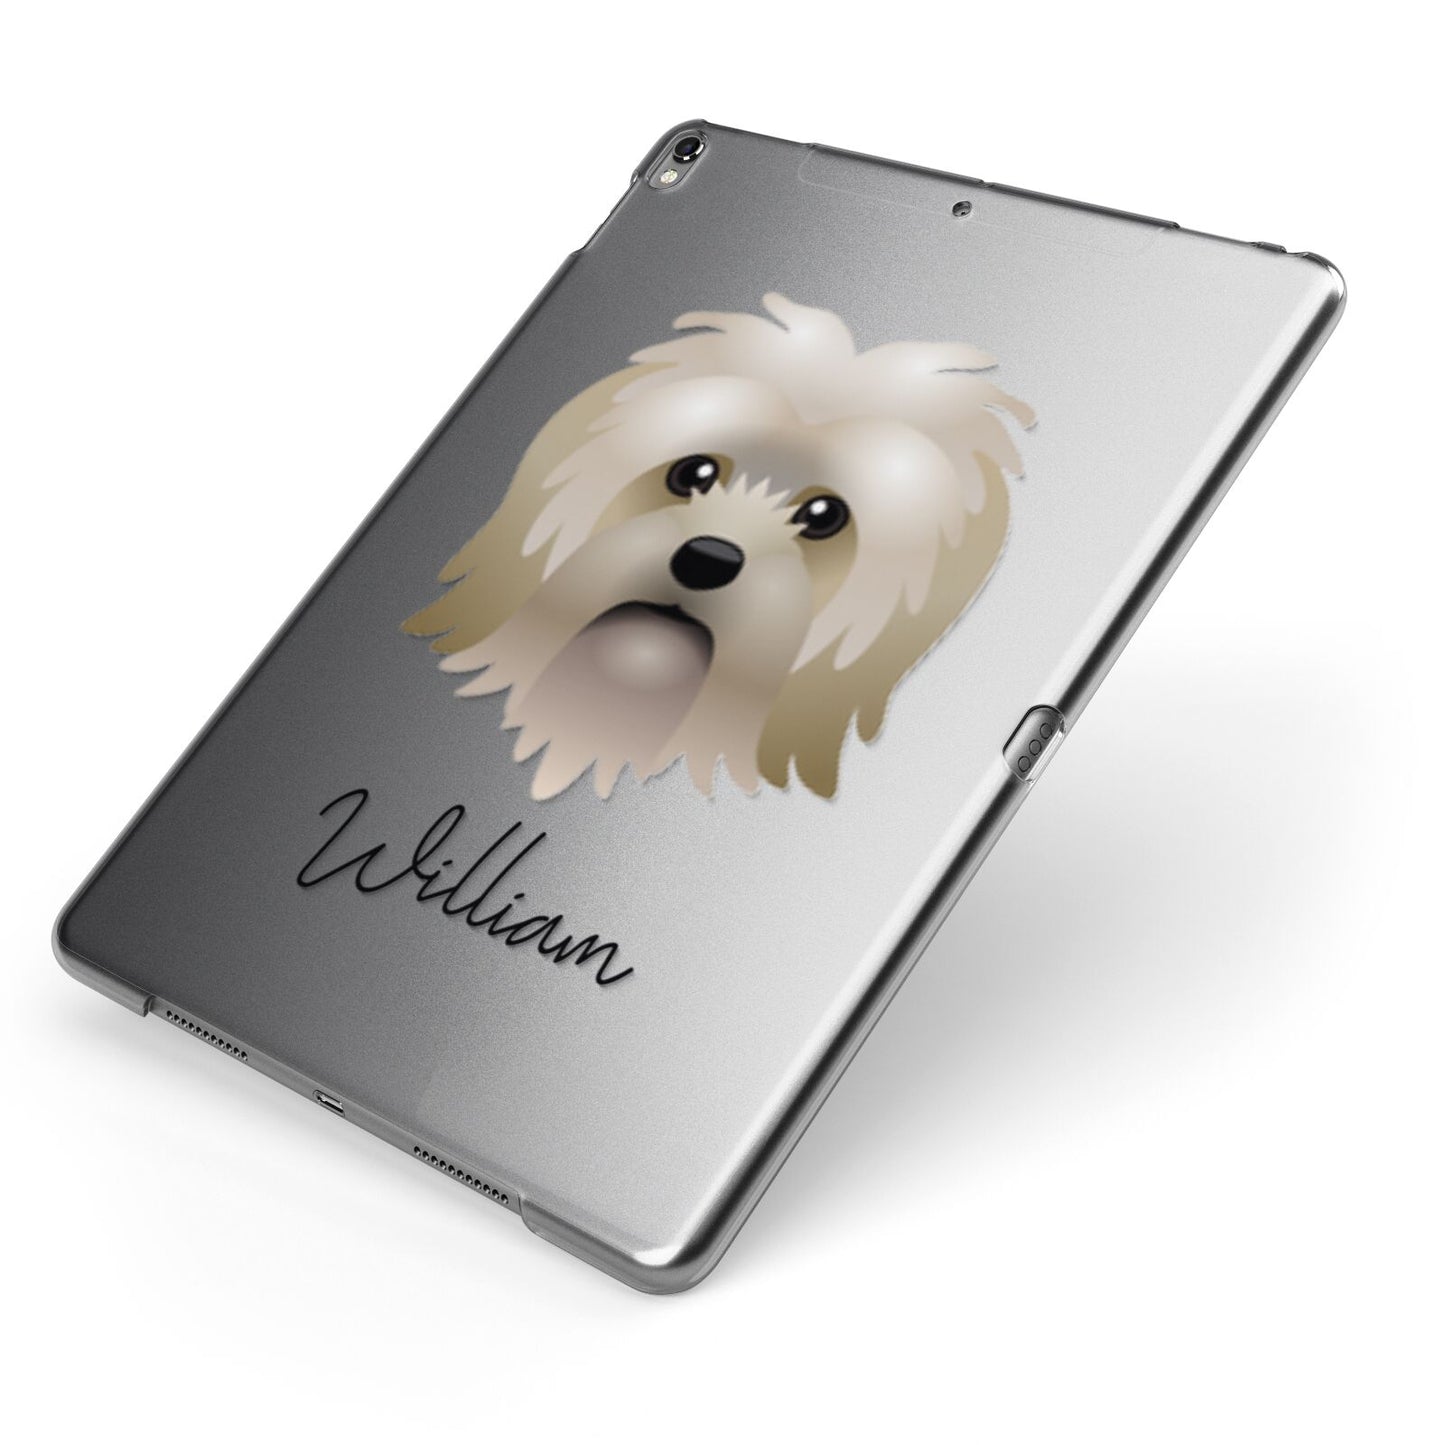 Lo wchen Personalised Apple iPad Case on Grey iPad Side View